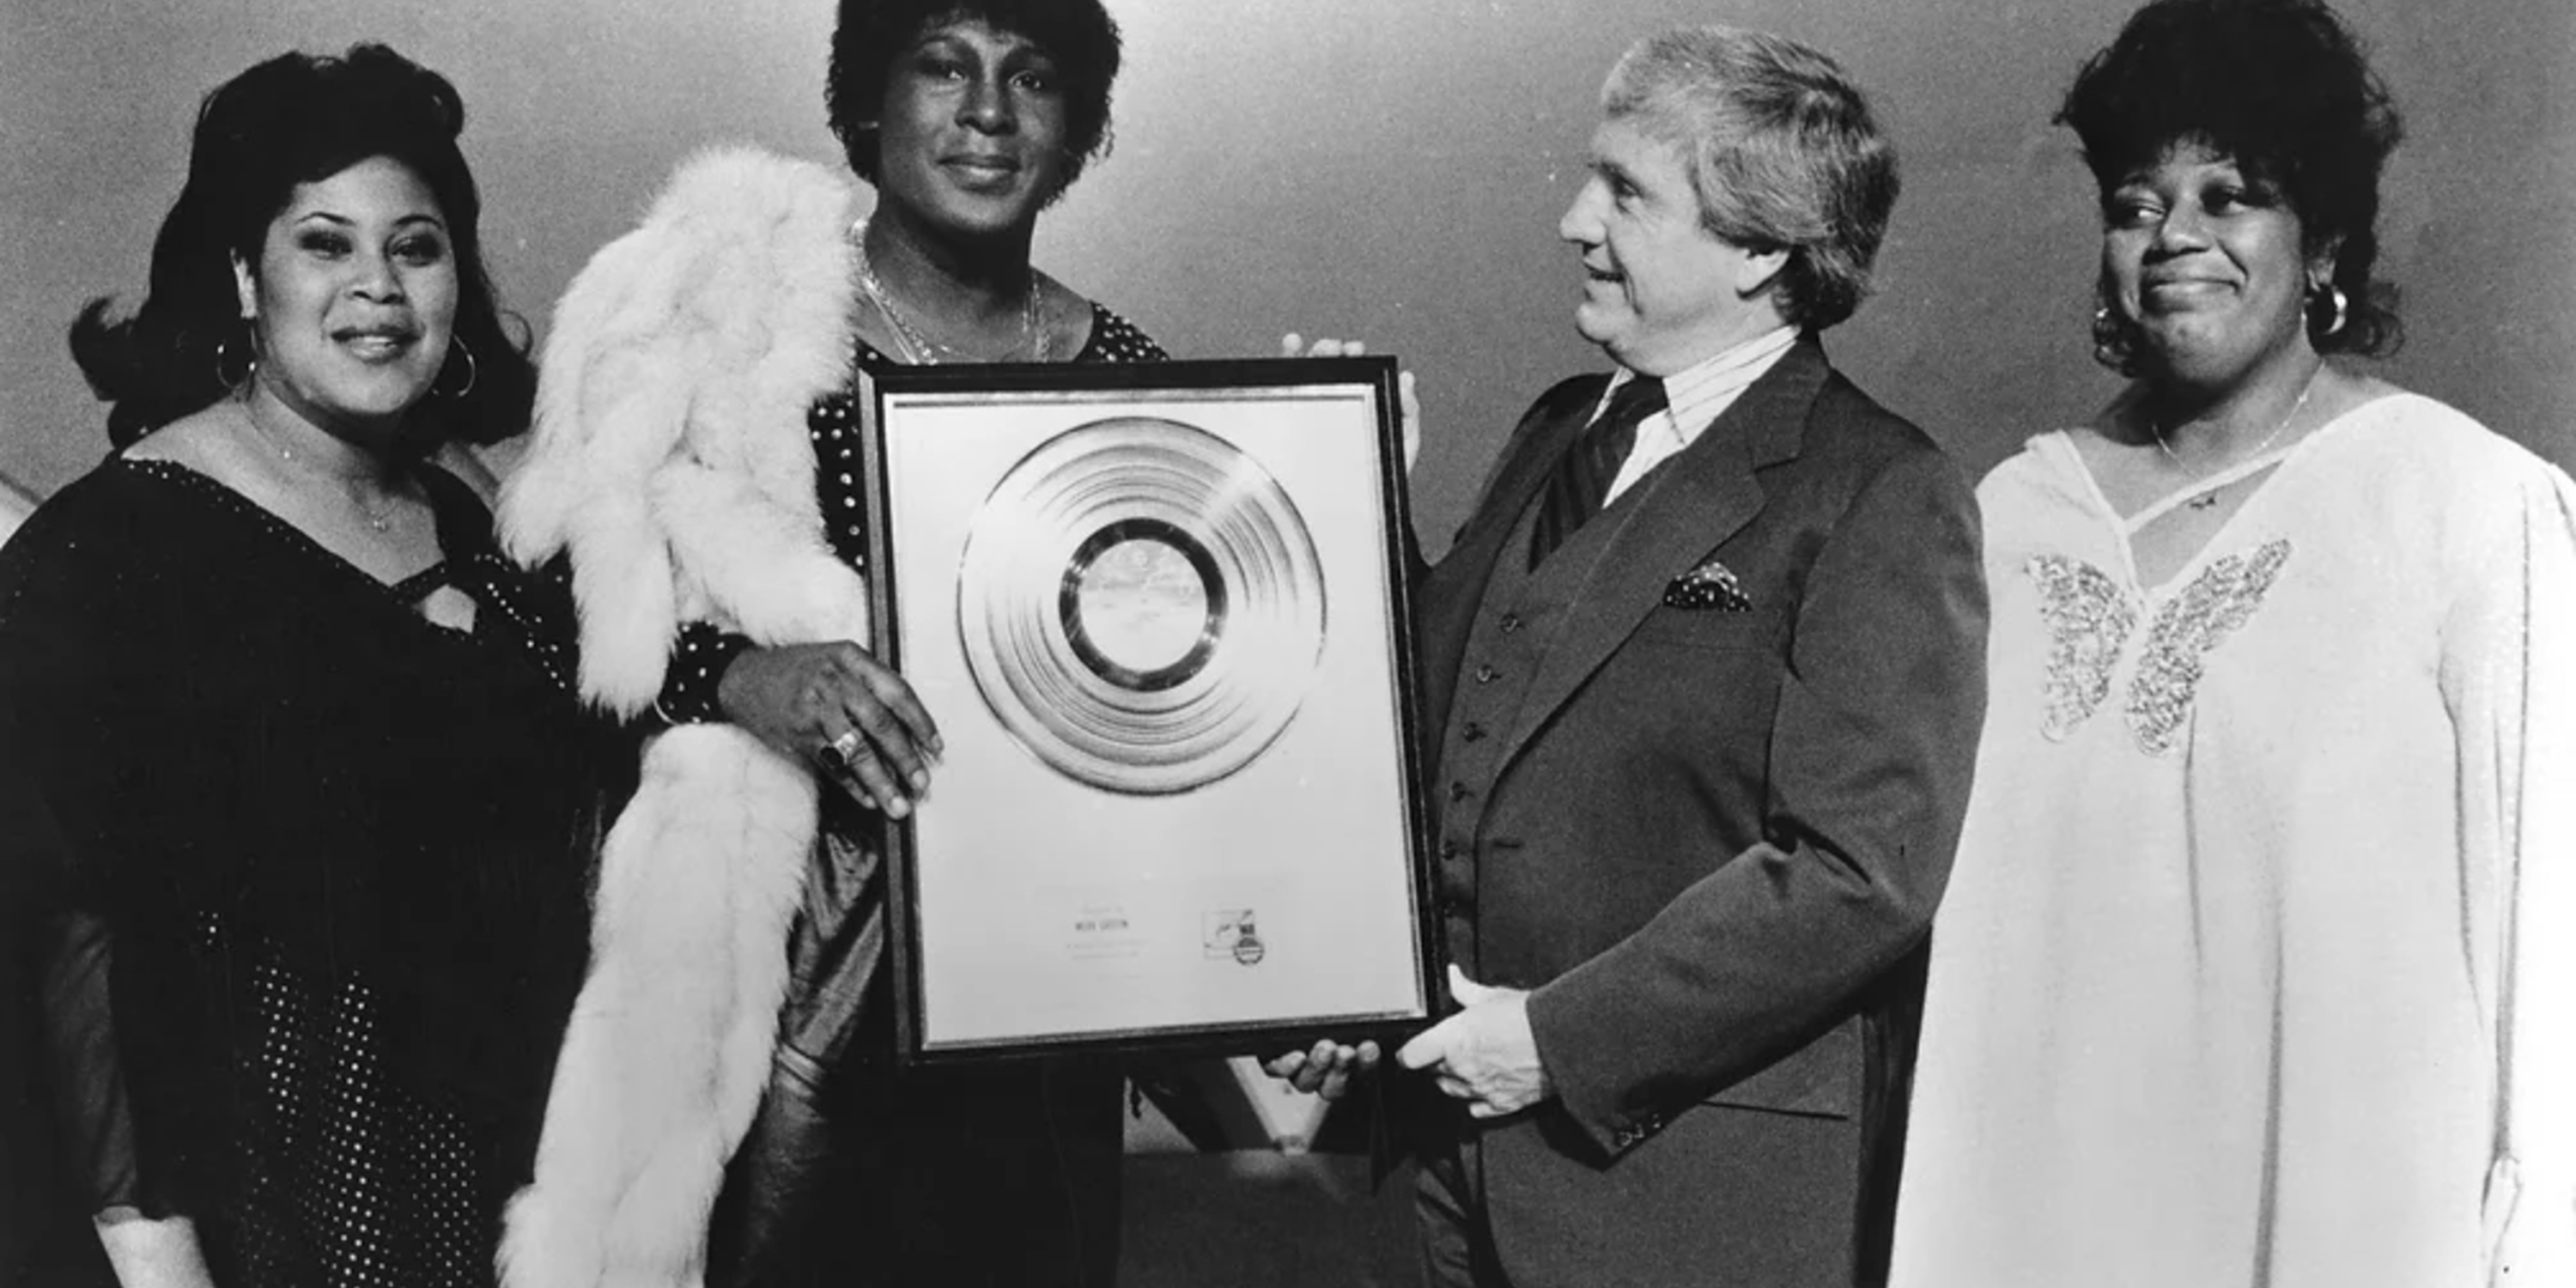 Sylvester receiving the RIAA Gold record for Step II, with Martha Wash and Izora Rhodes - Photo by Michael Ochs/Michael Ochs Archives/Getty Images